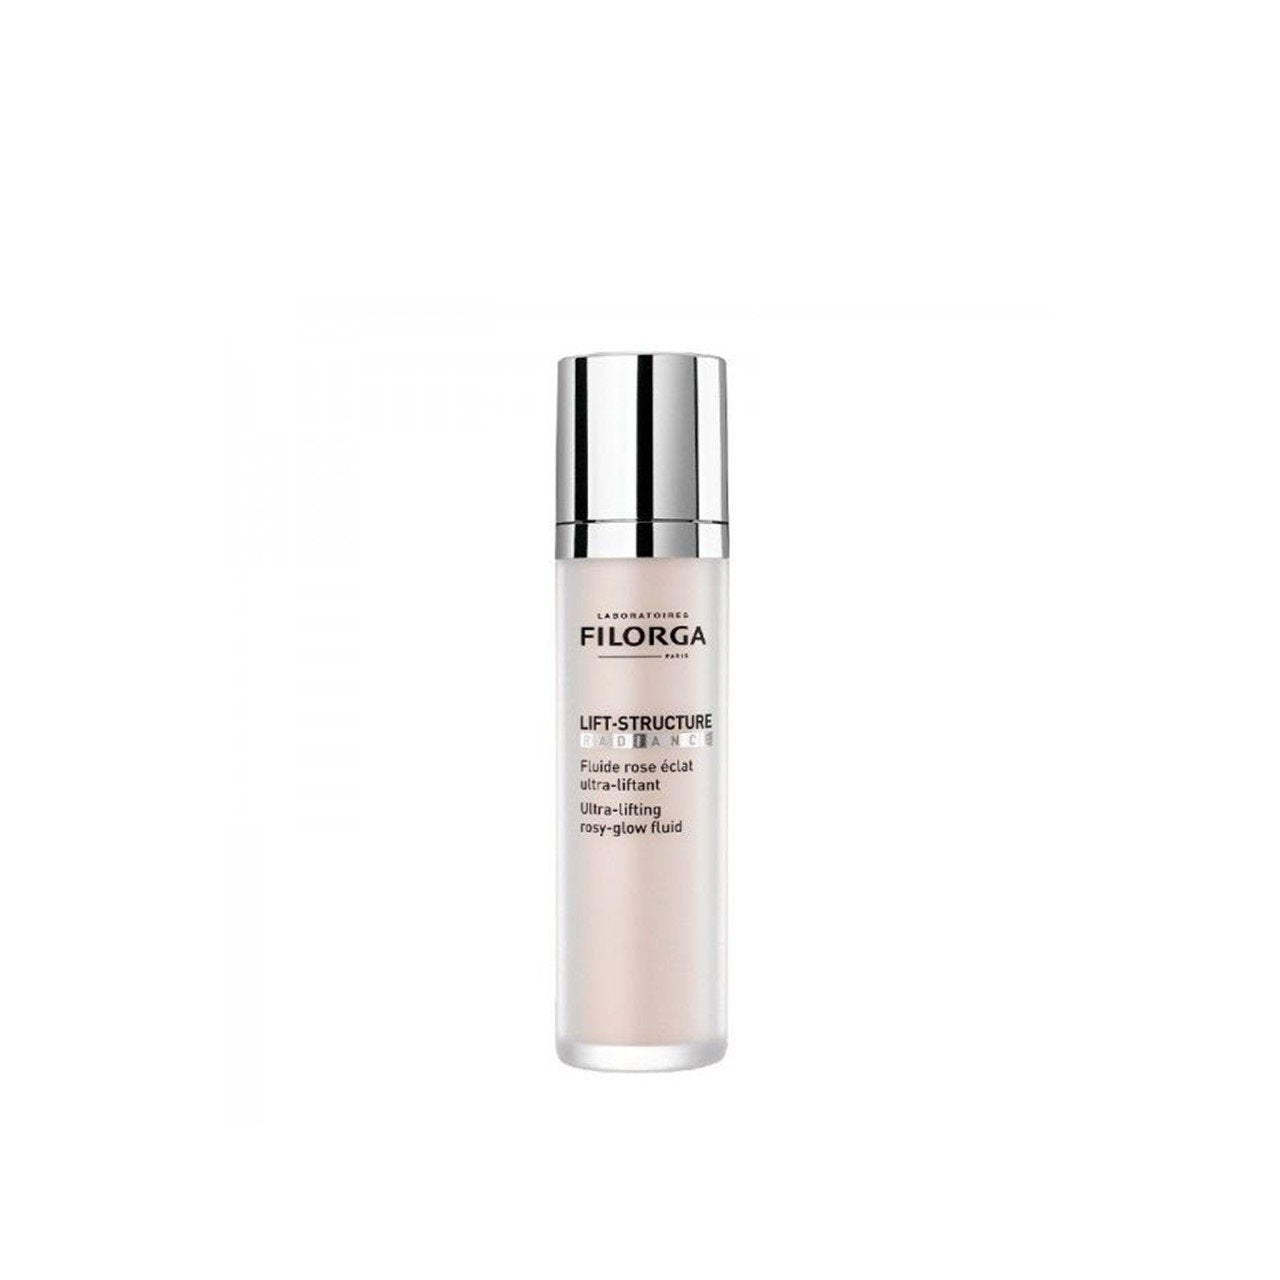 Filorga Lift-Structure Radiance Fluide Ultra-Lifting Rosy-Glow 50 ml